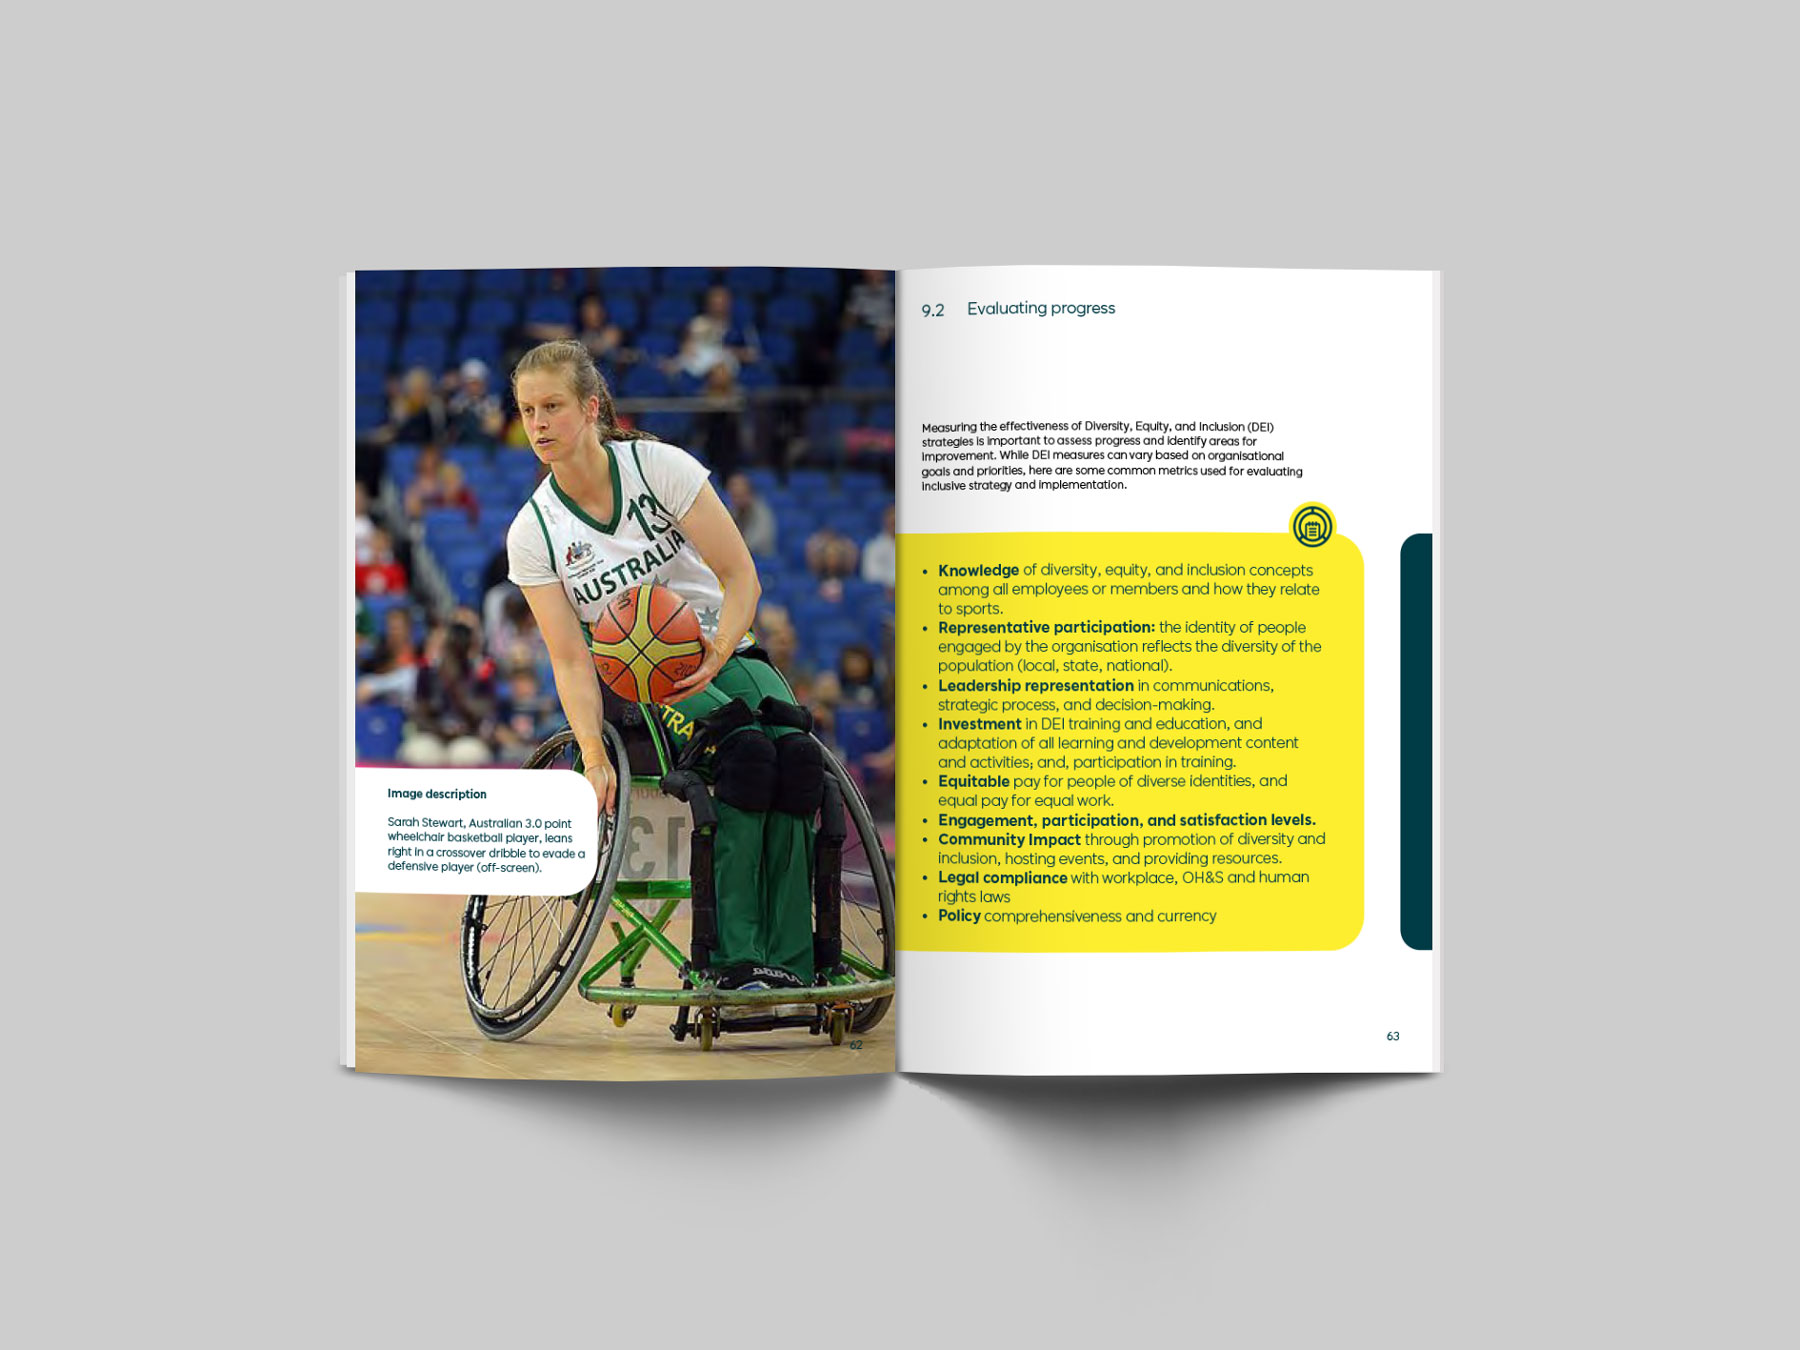 Image showing page spread of universal design guide